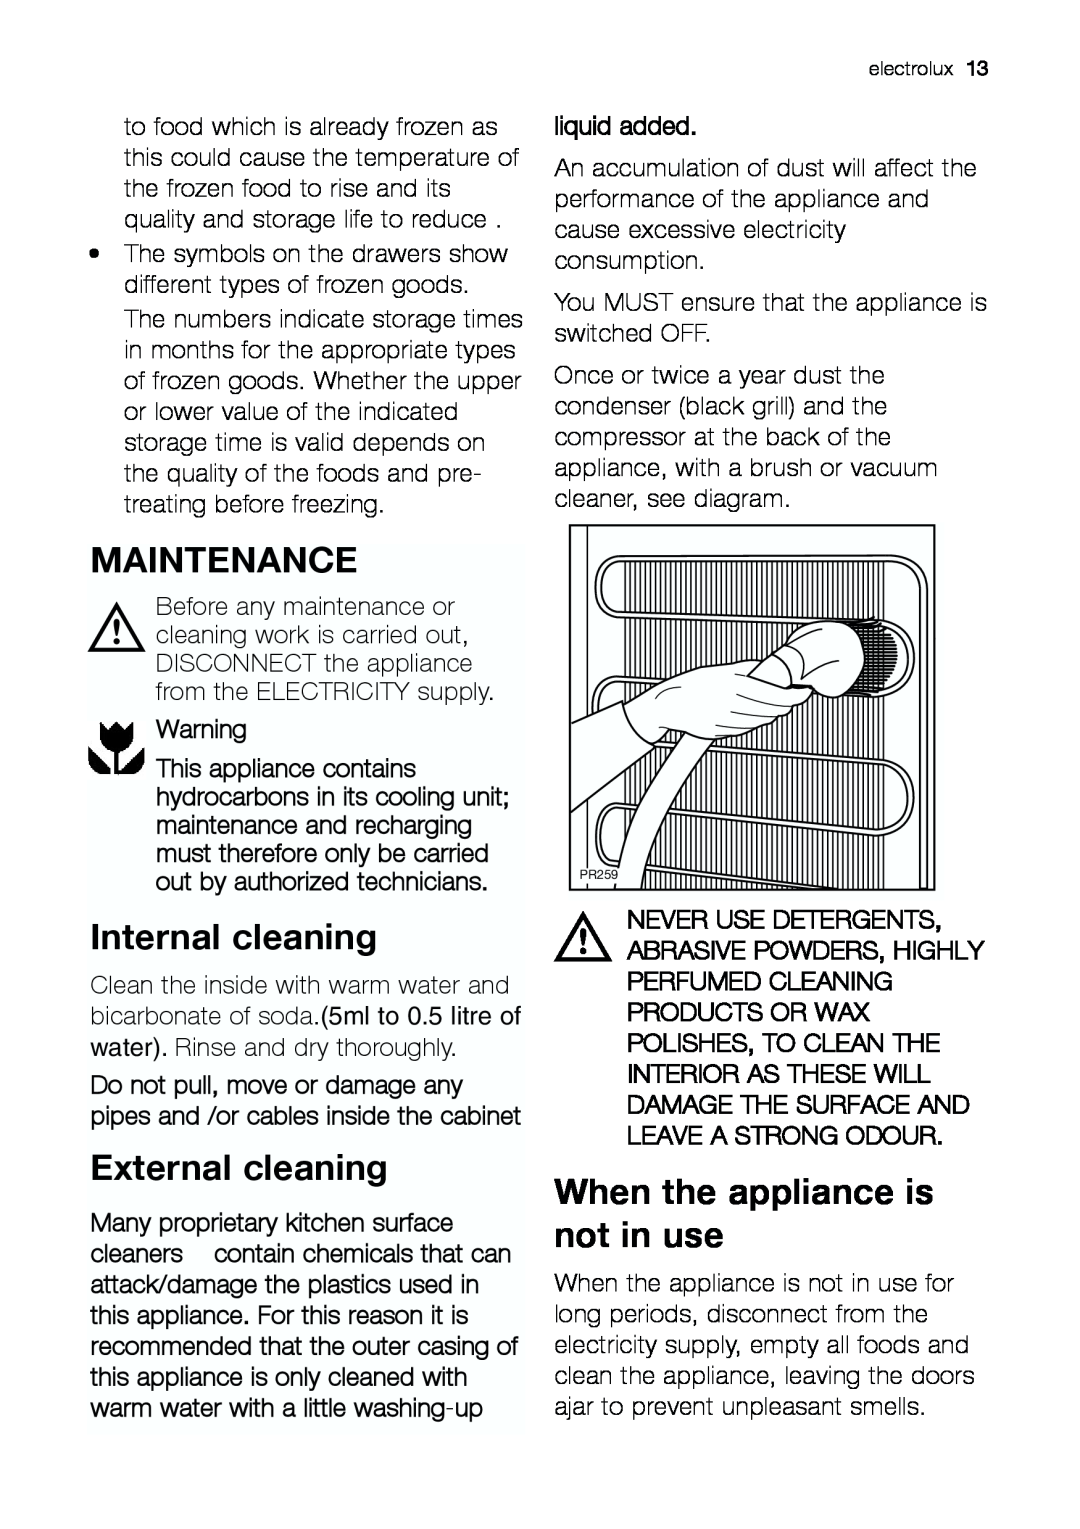 Electrolux EUF 23292 W Maintenance, Internal cleaning, External cleaning, When the appliance is not in use, liquid added 